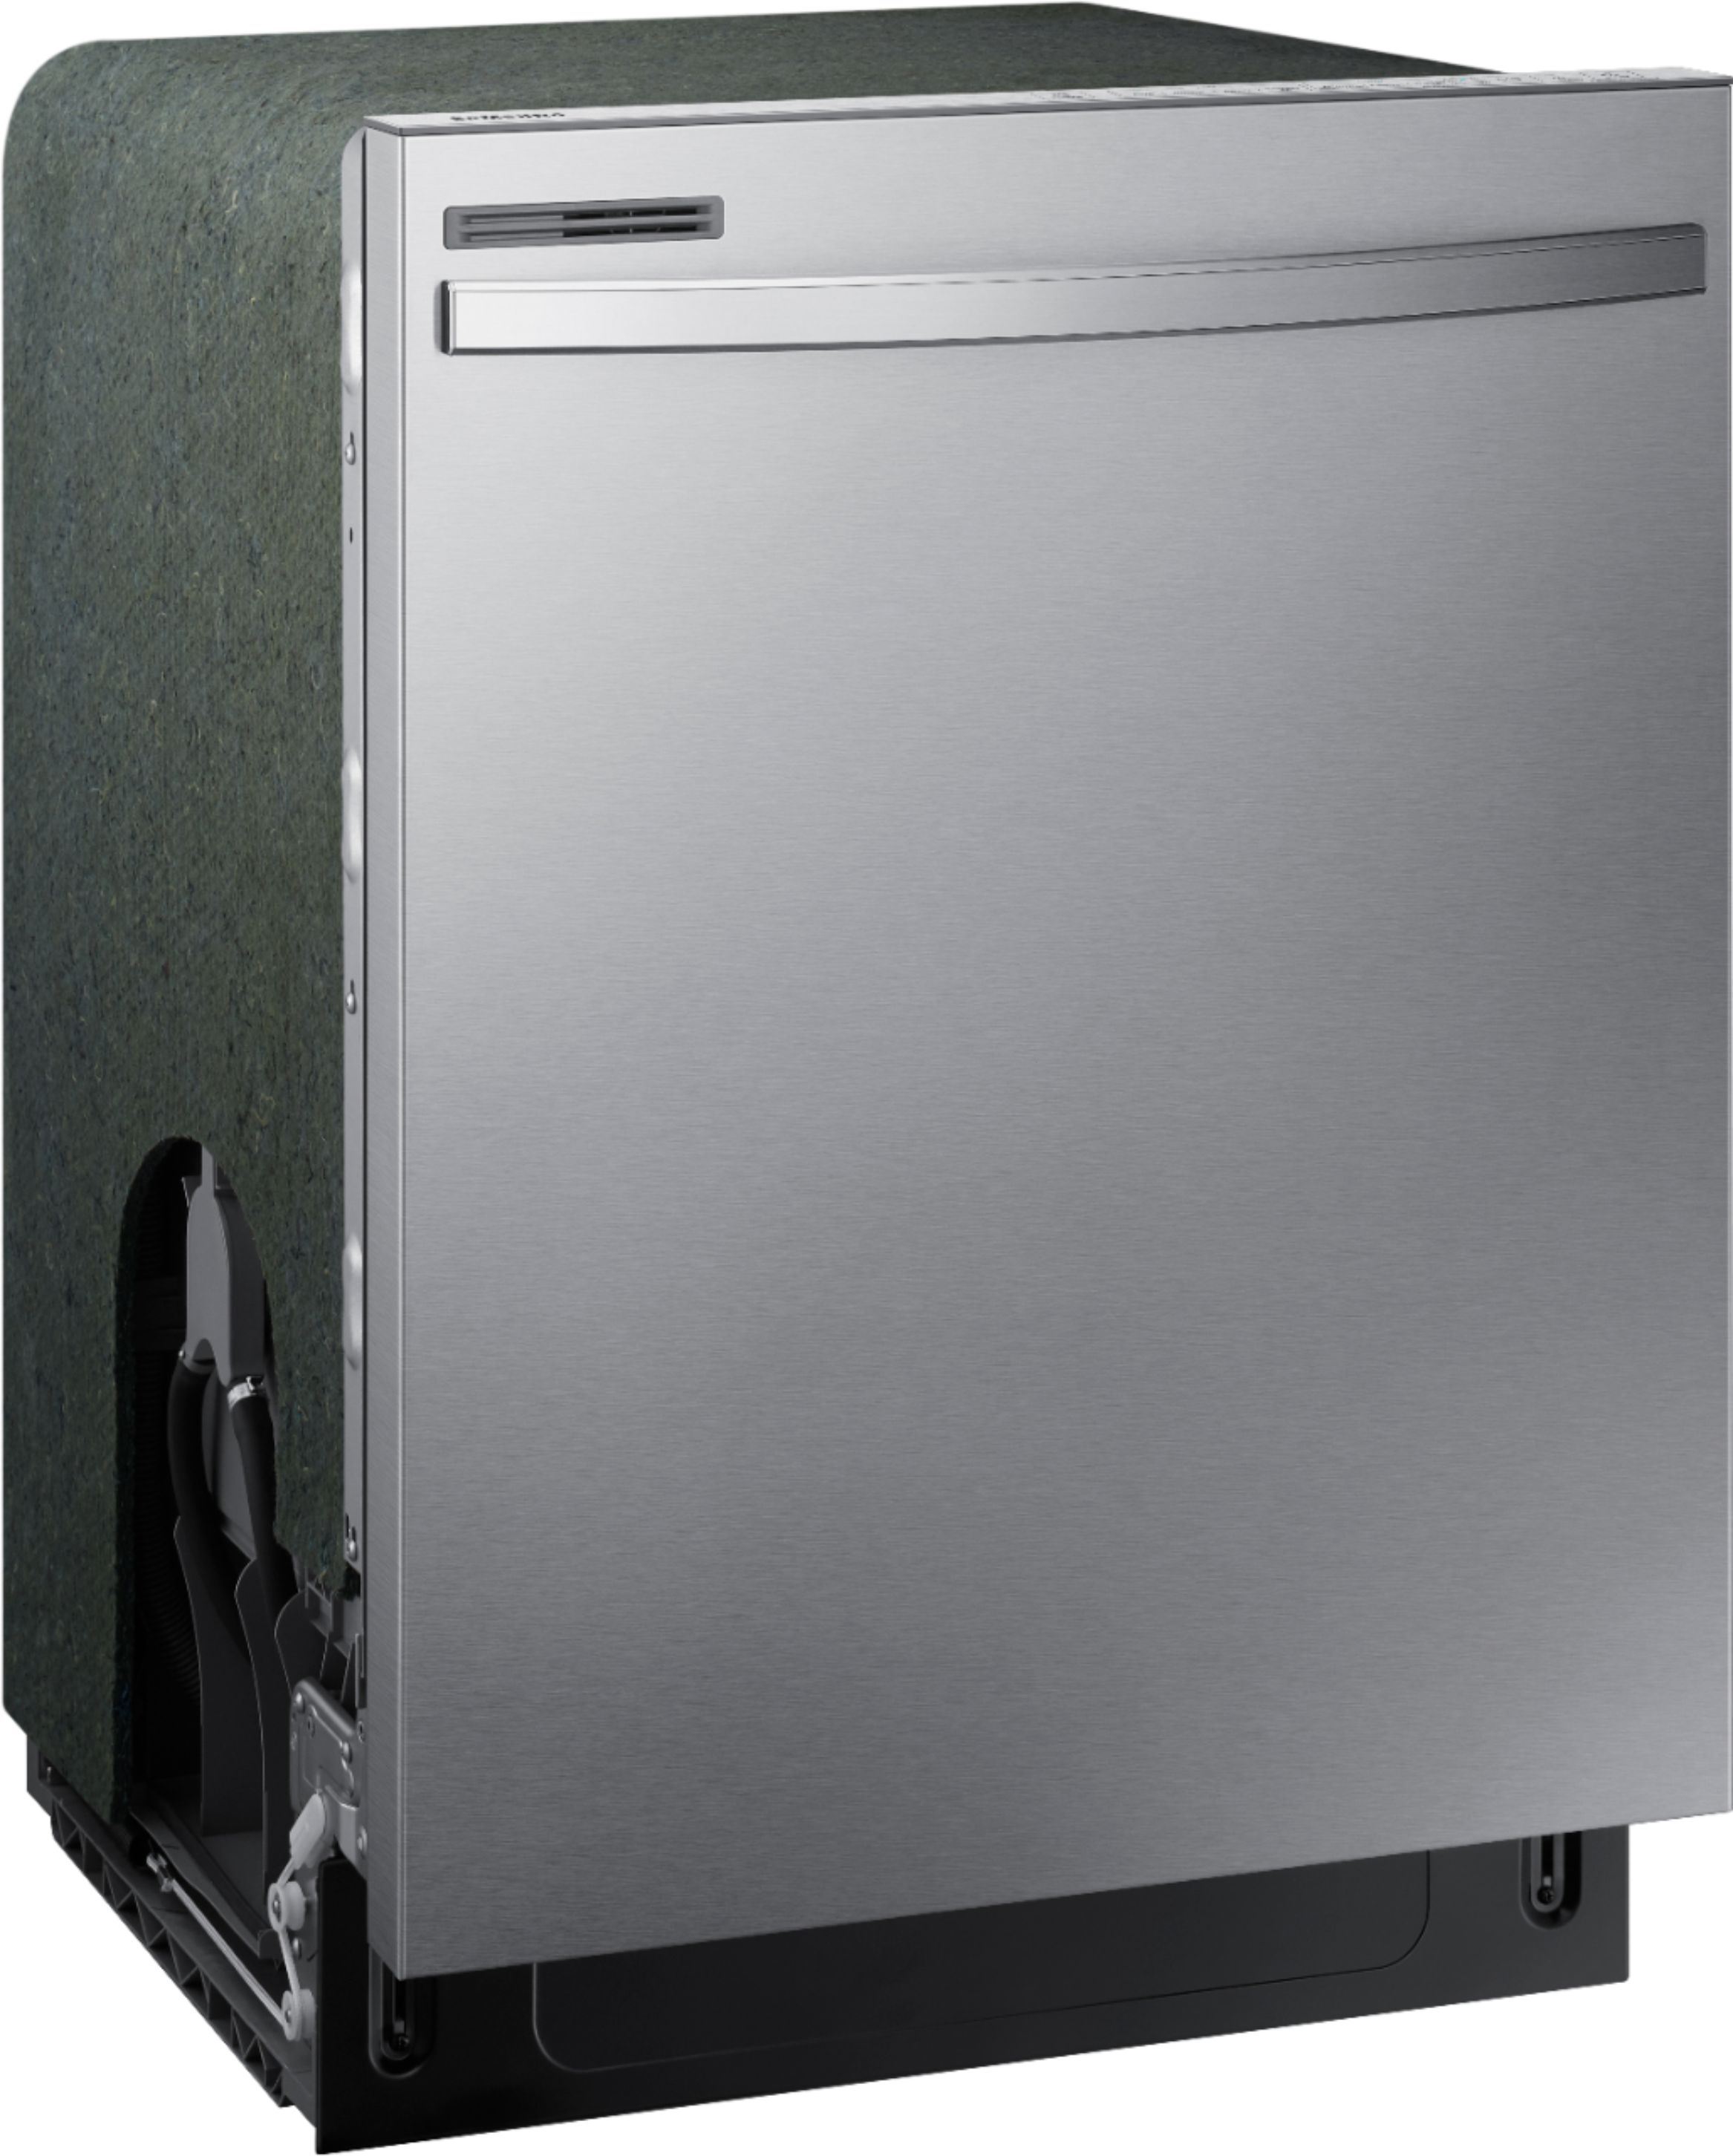 Angle View: Samsung - 24" Top Control Built-In Dishwasher - Stainless Steel